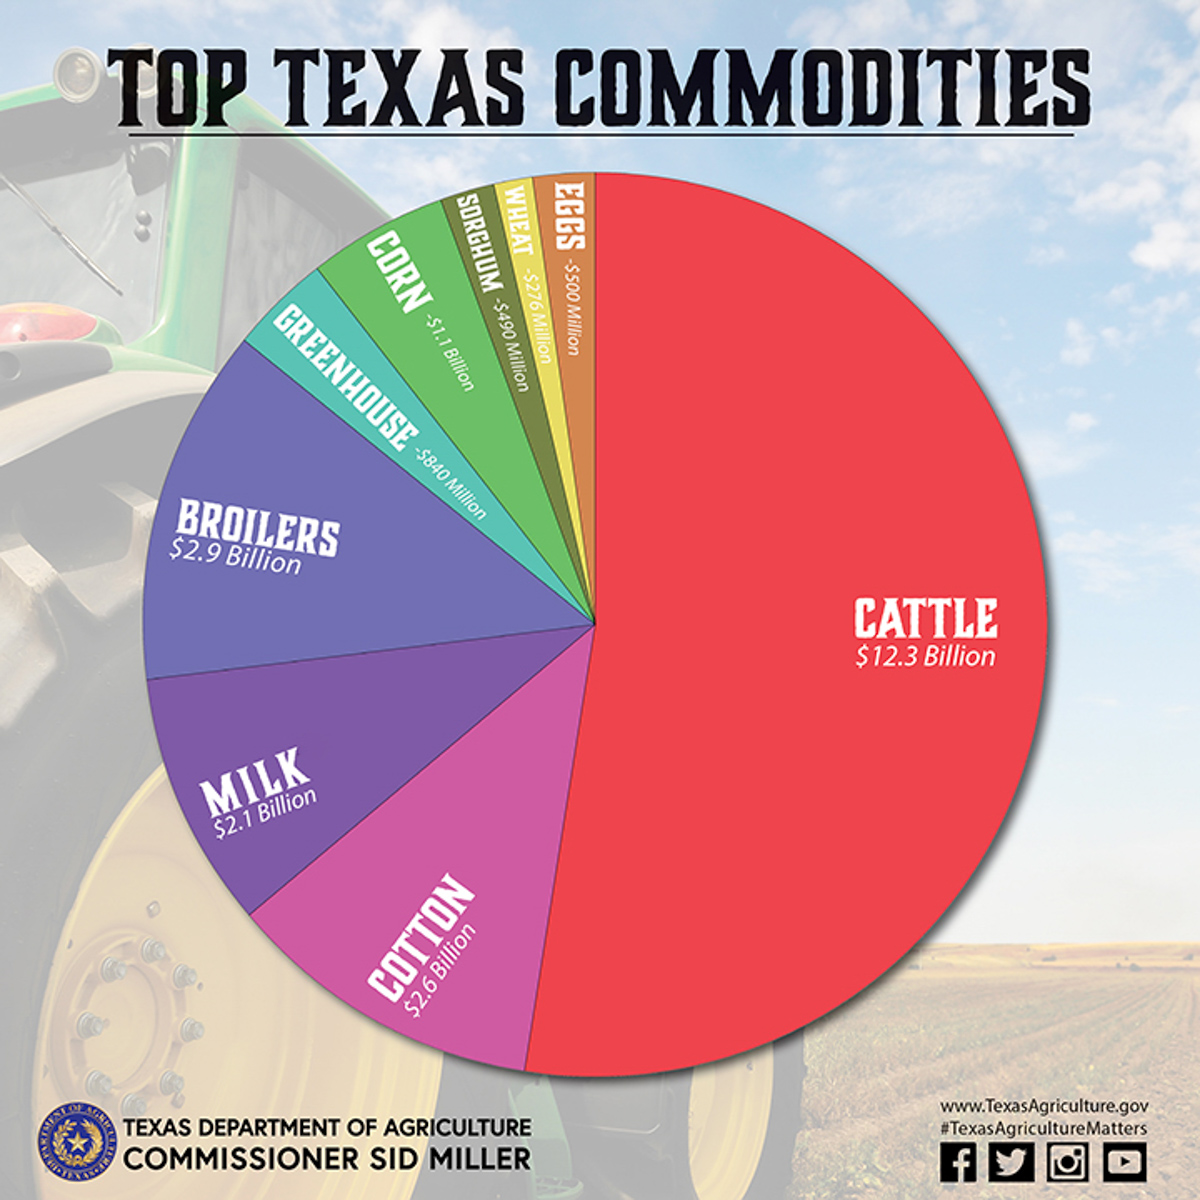 Courtesy photo from the Texas Department of Agriculture.